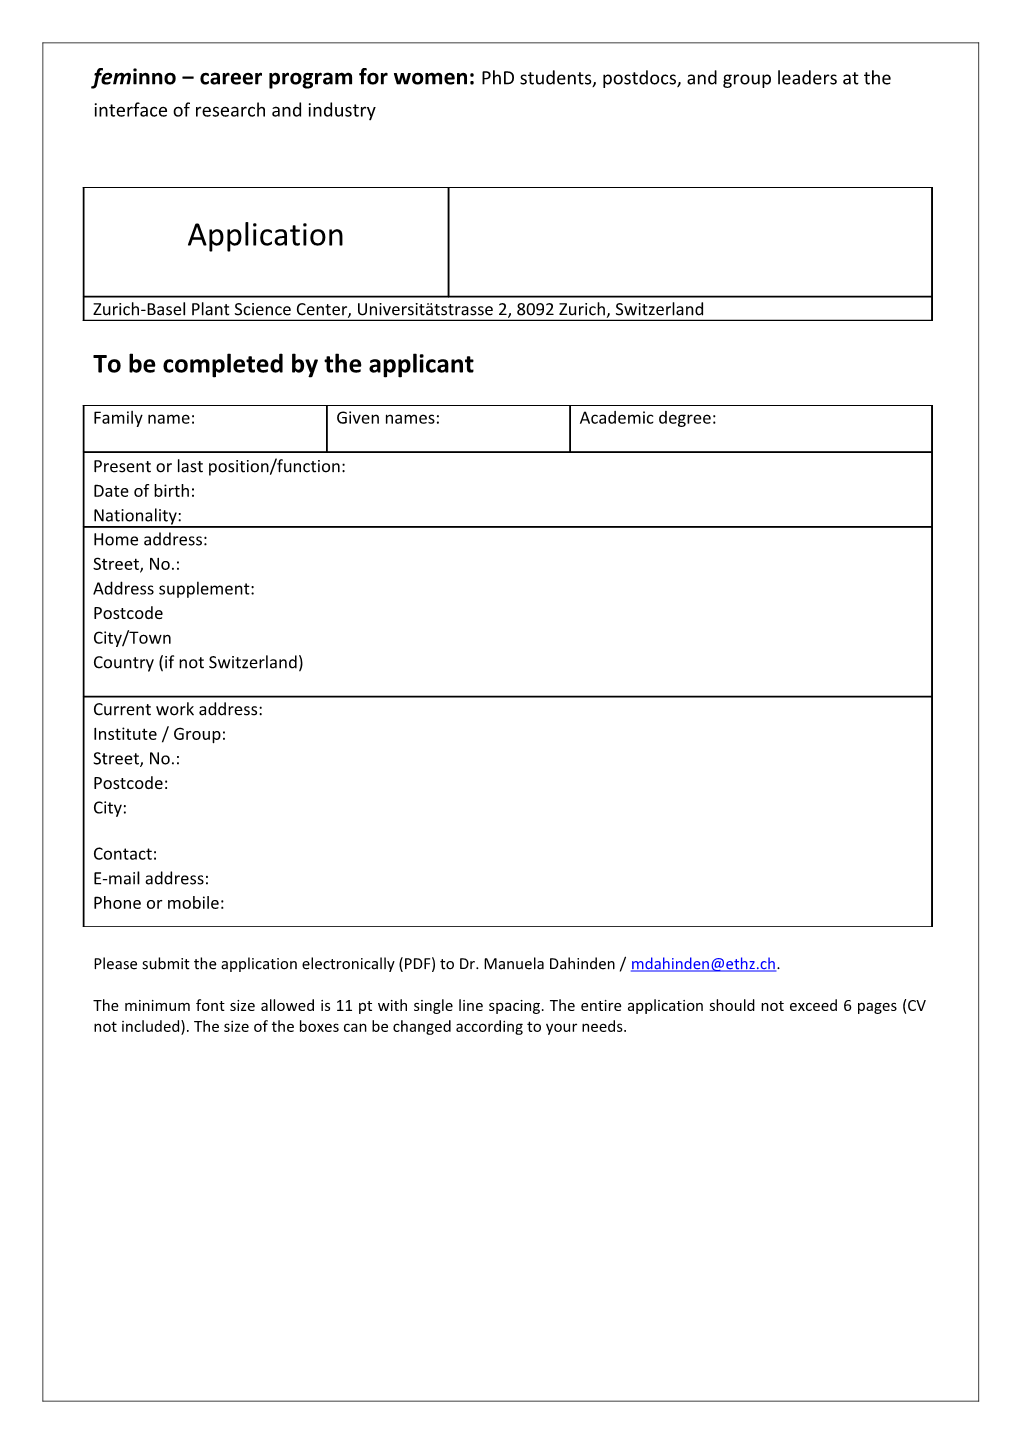 To Be Completed by the Applicant